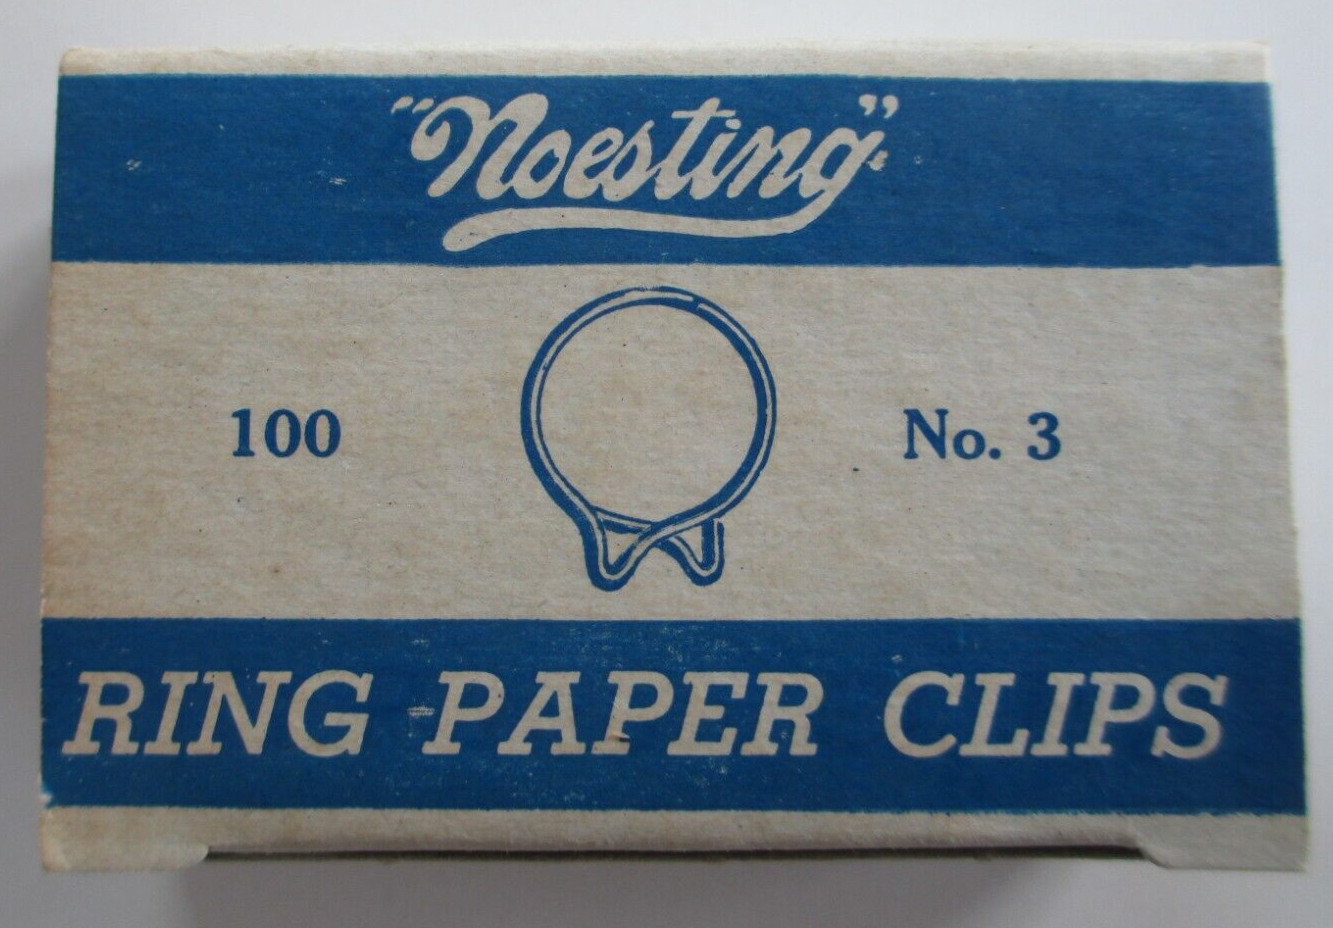 VINTAGE BOX NOESTING No 3 RING PAPER CLIPS ROUND STEEL WIRE OFFICE SUPPLIES B29